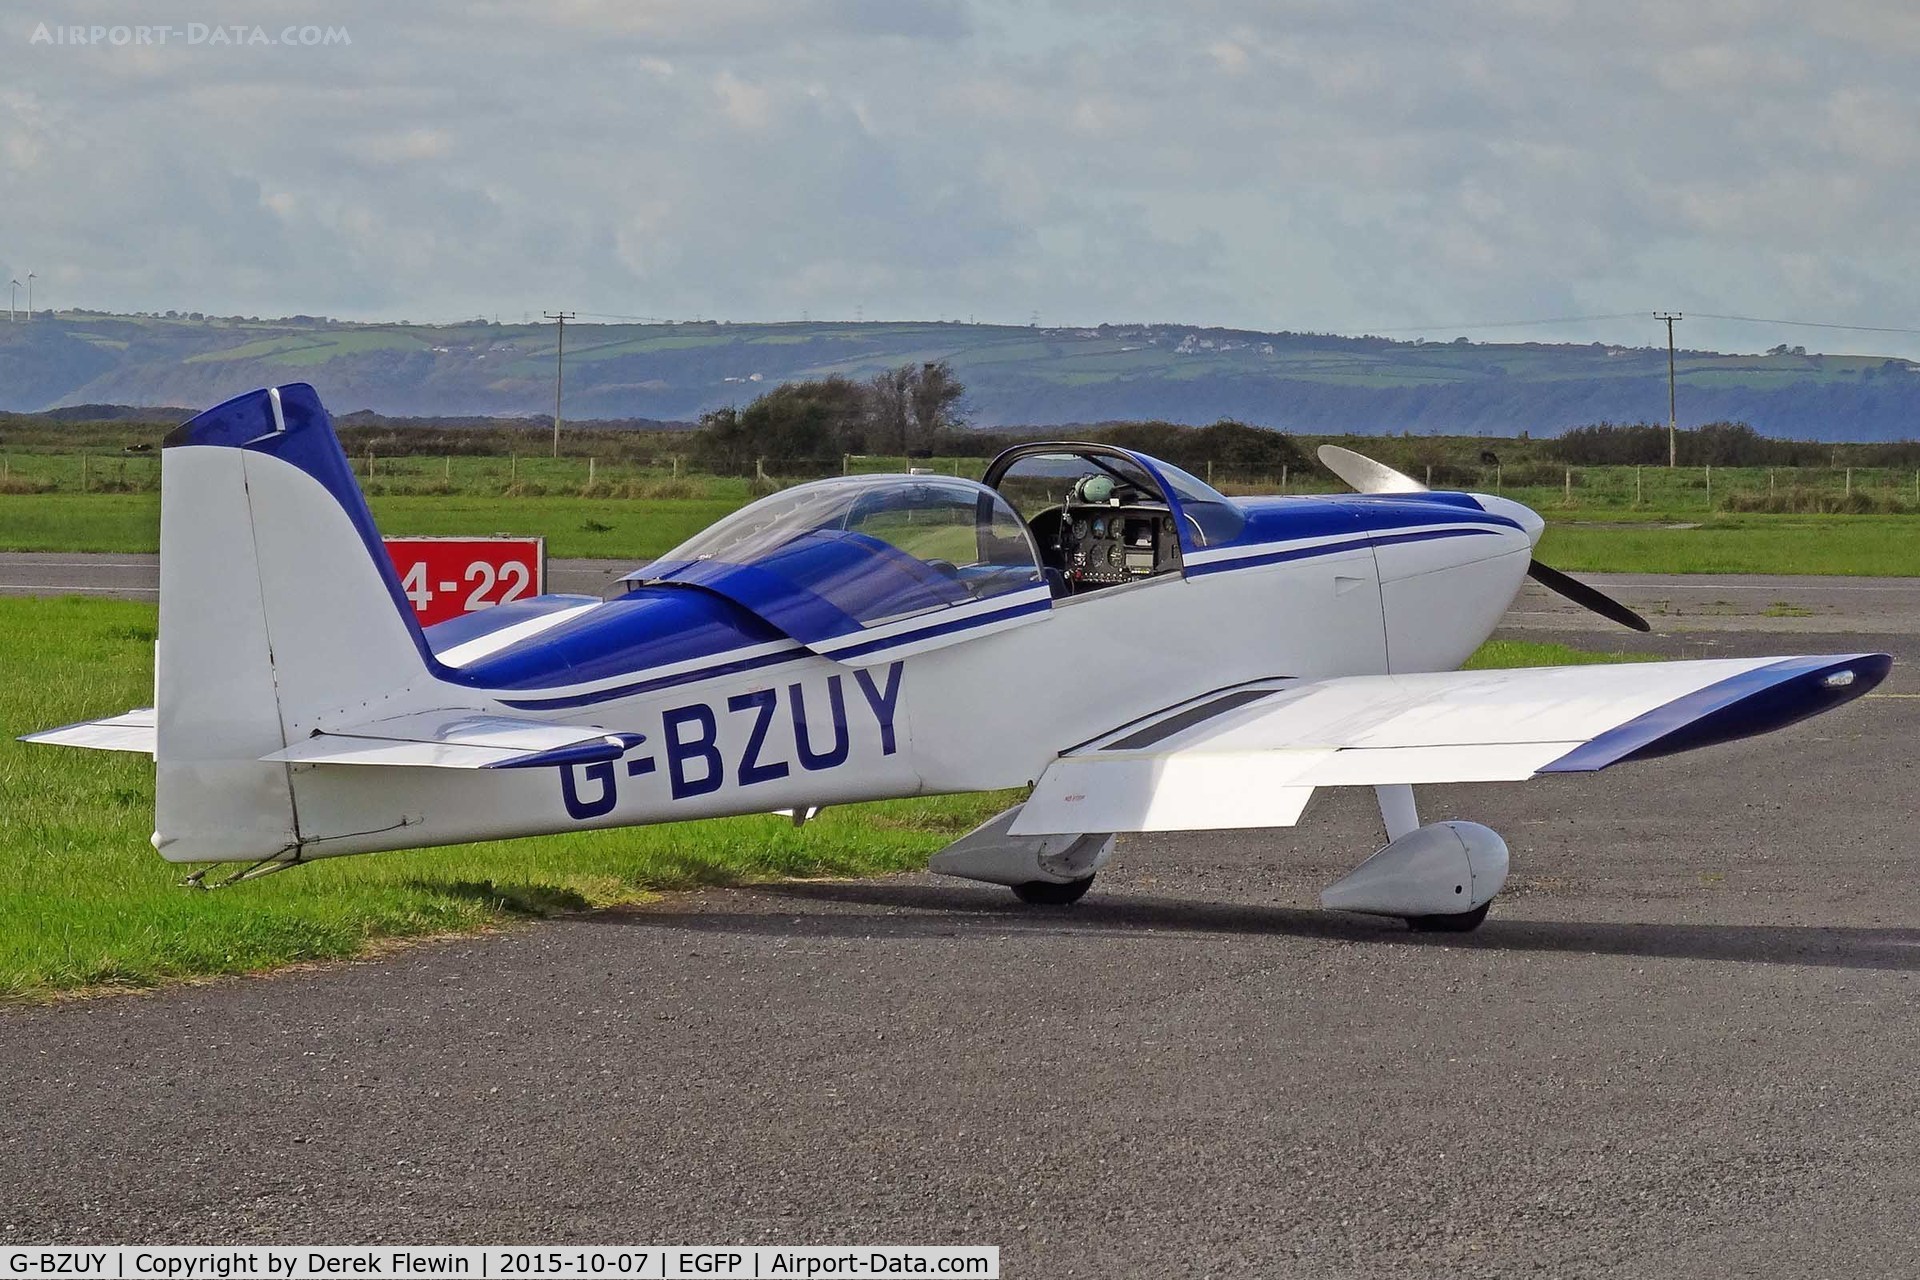 G-BZUY, 2001 Vans RV-6 C/N PFA 181A-13471, Resident RV-6, seen parked up following cross wind practice.